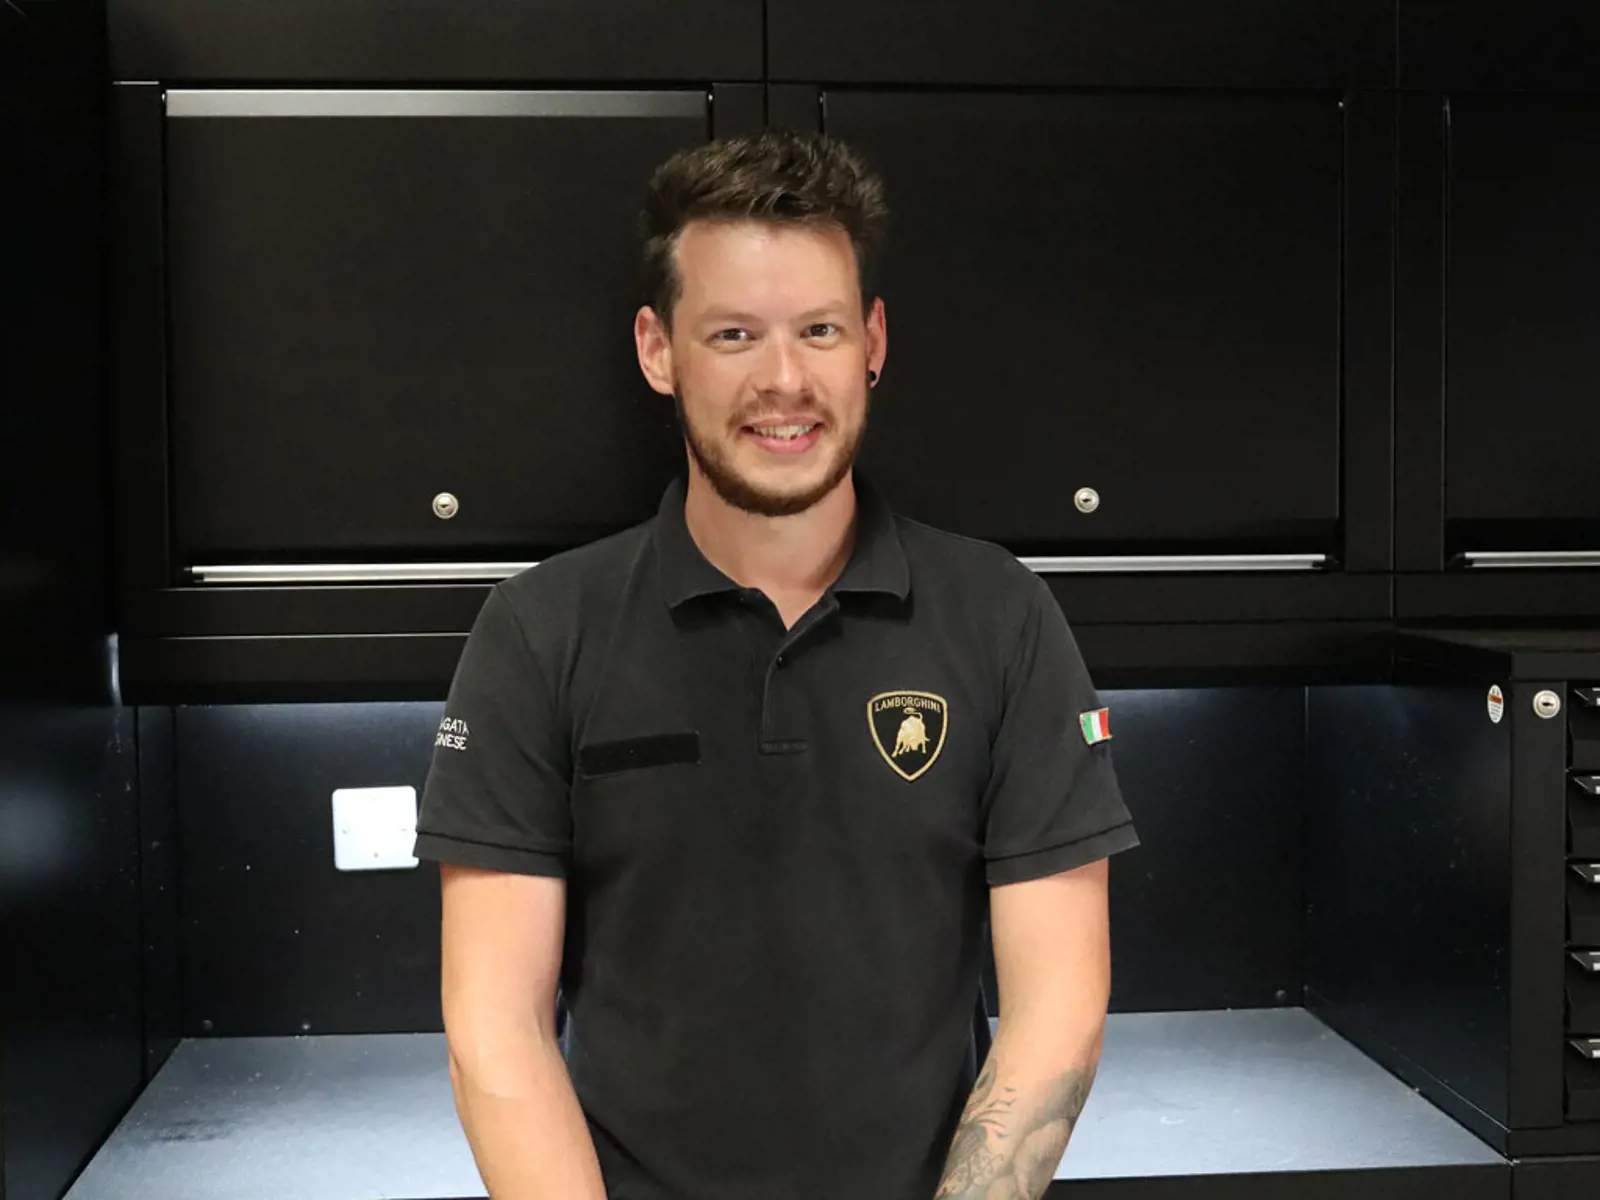 Andy gives us an insight into his exciting role as a Vehicle Technician at Grange Tunbridge Wells.